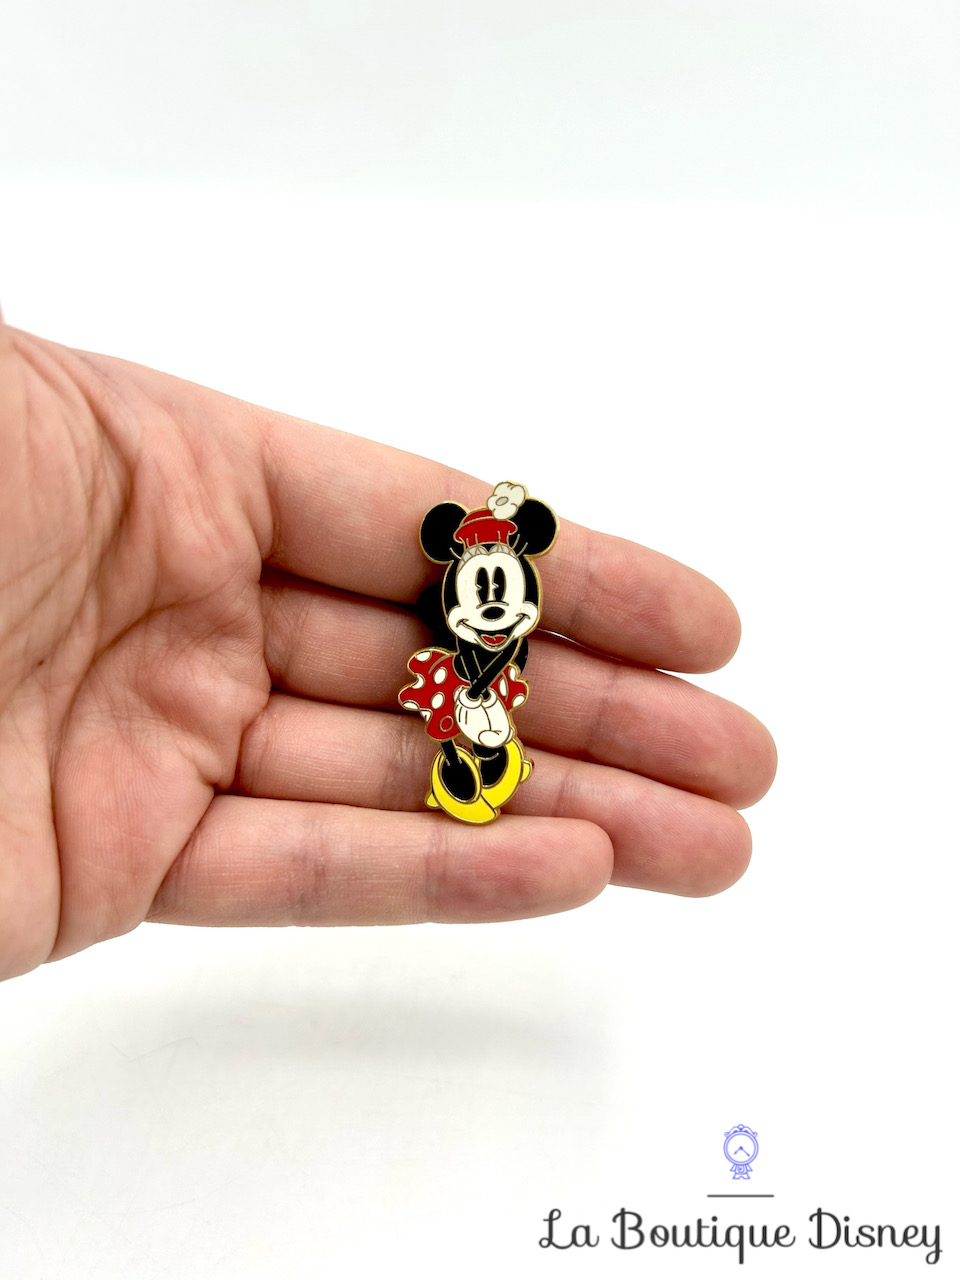 Pin Minnie Classic Opening Edition Disneyland Paris 2010 Classic Minnie Mouse 77601